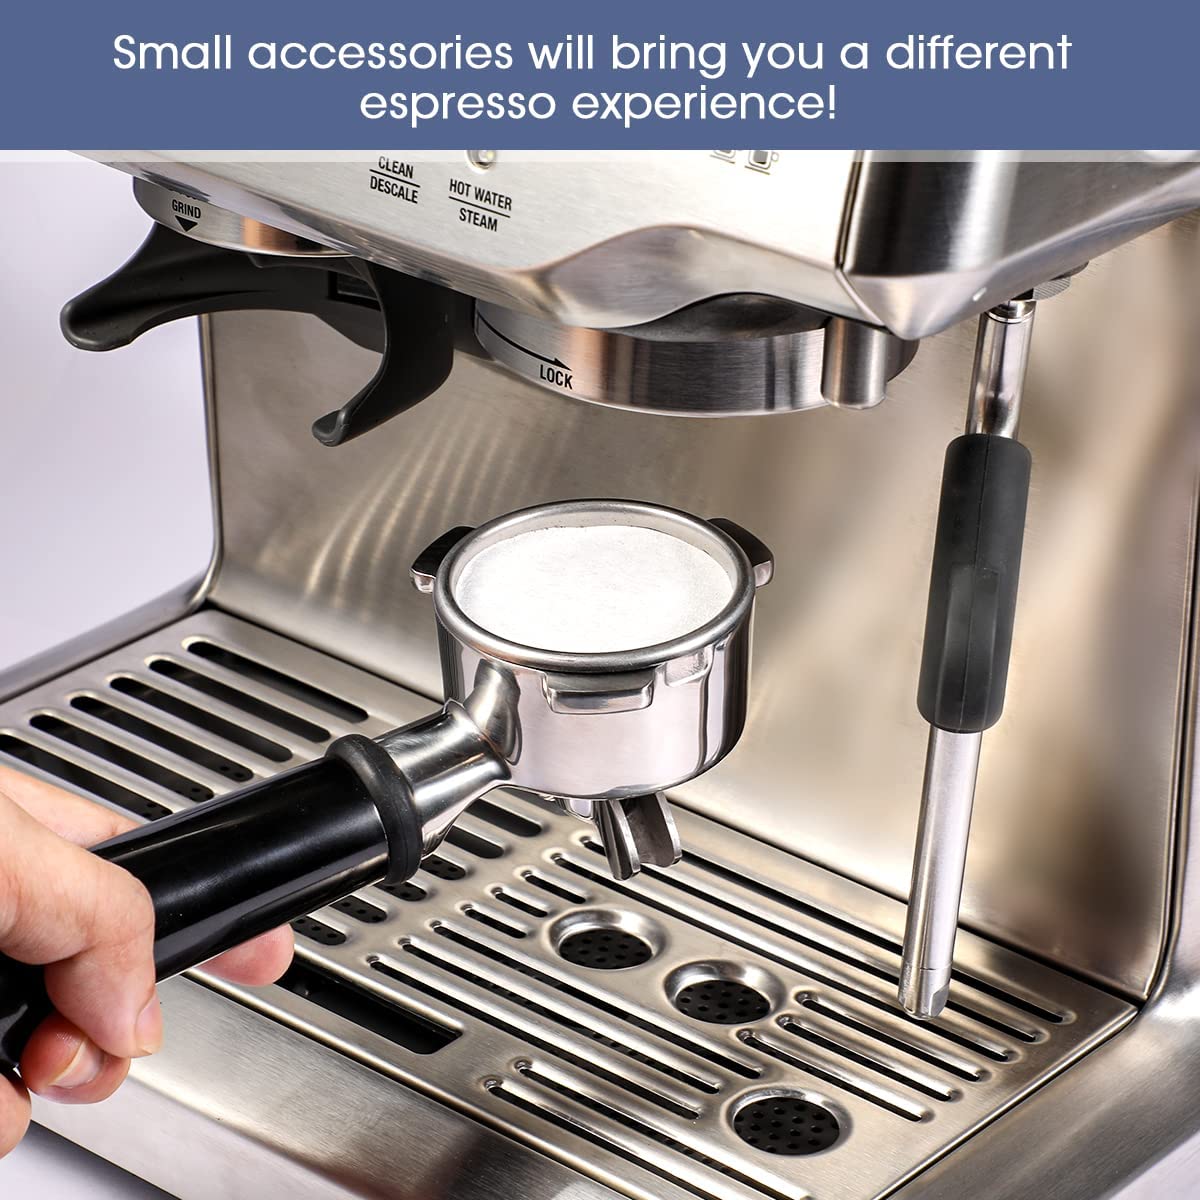 small accessories bring you a different espresso experience